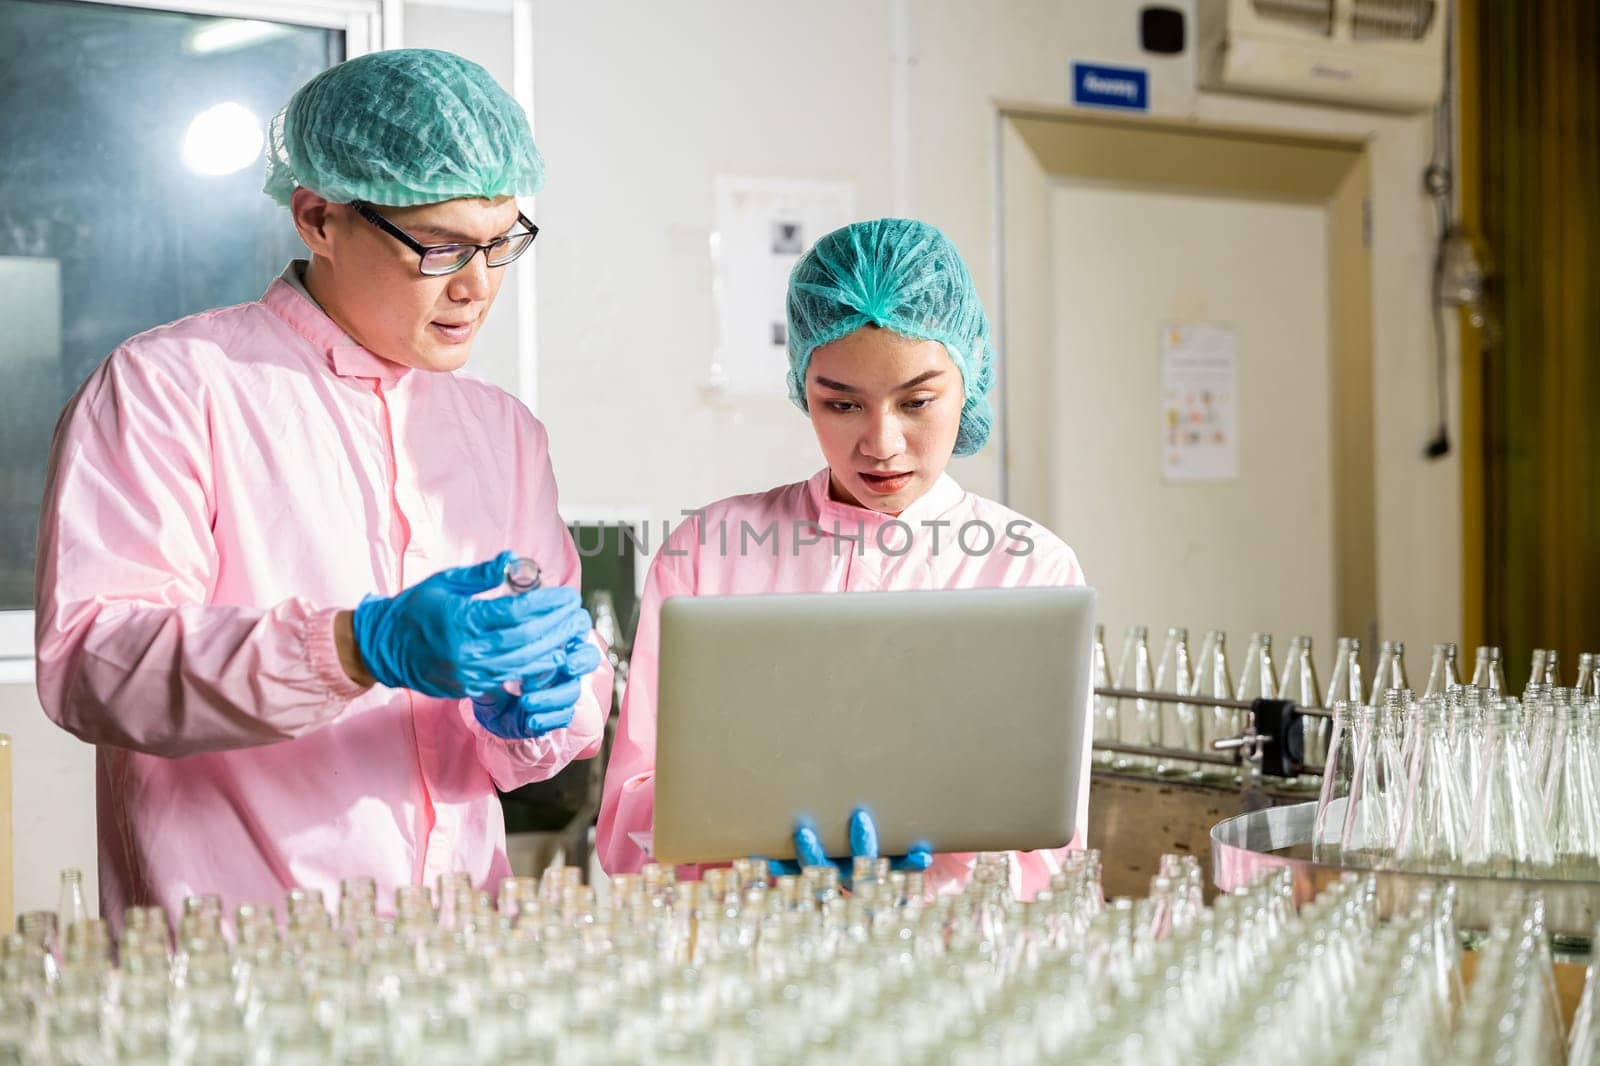 In a beverage factory's production line engineers carefully inspect product bottles on conveyor belt. Inspection and quality control conducted by professionals using a laptop for meticulous checks.